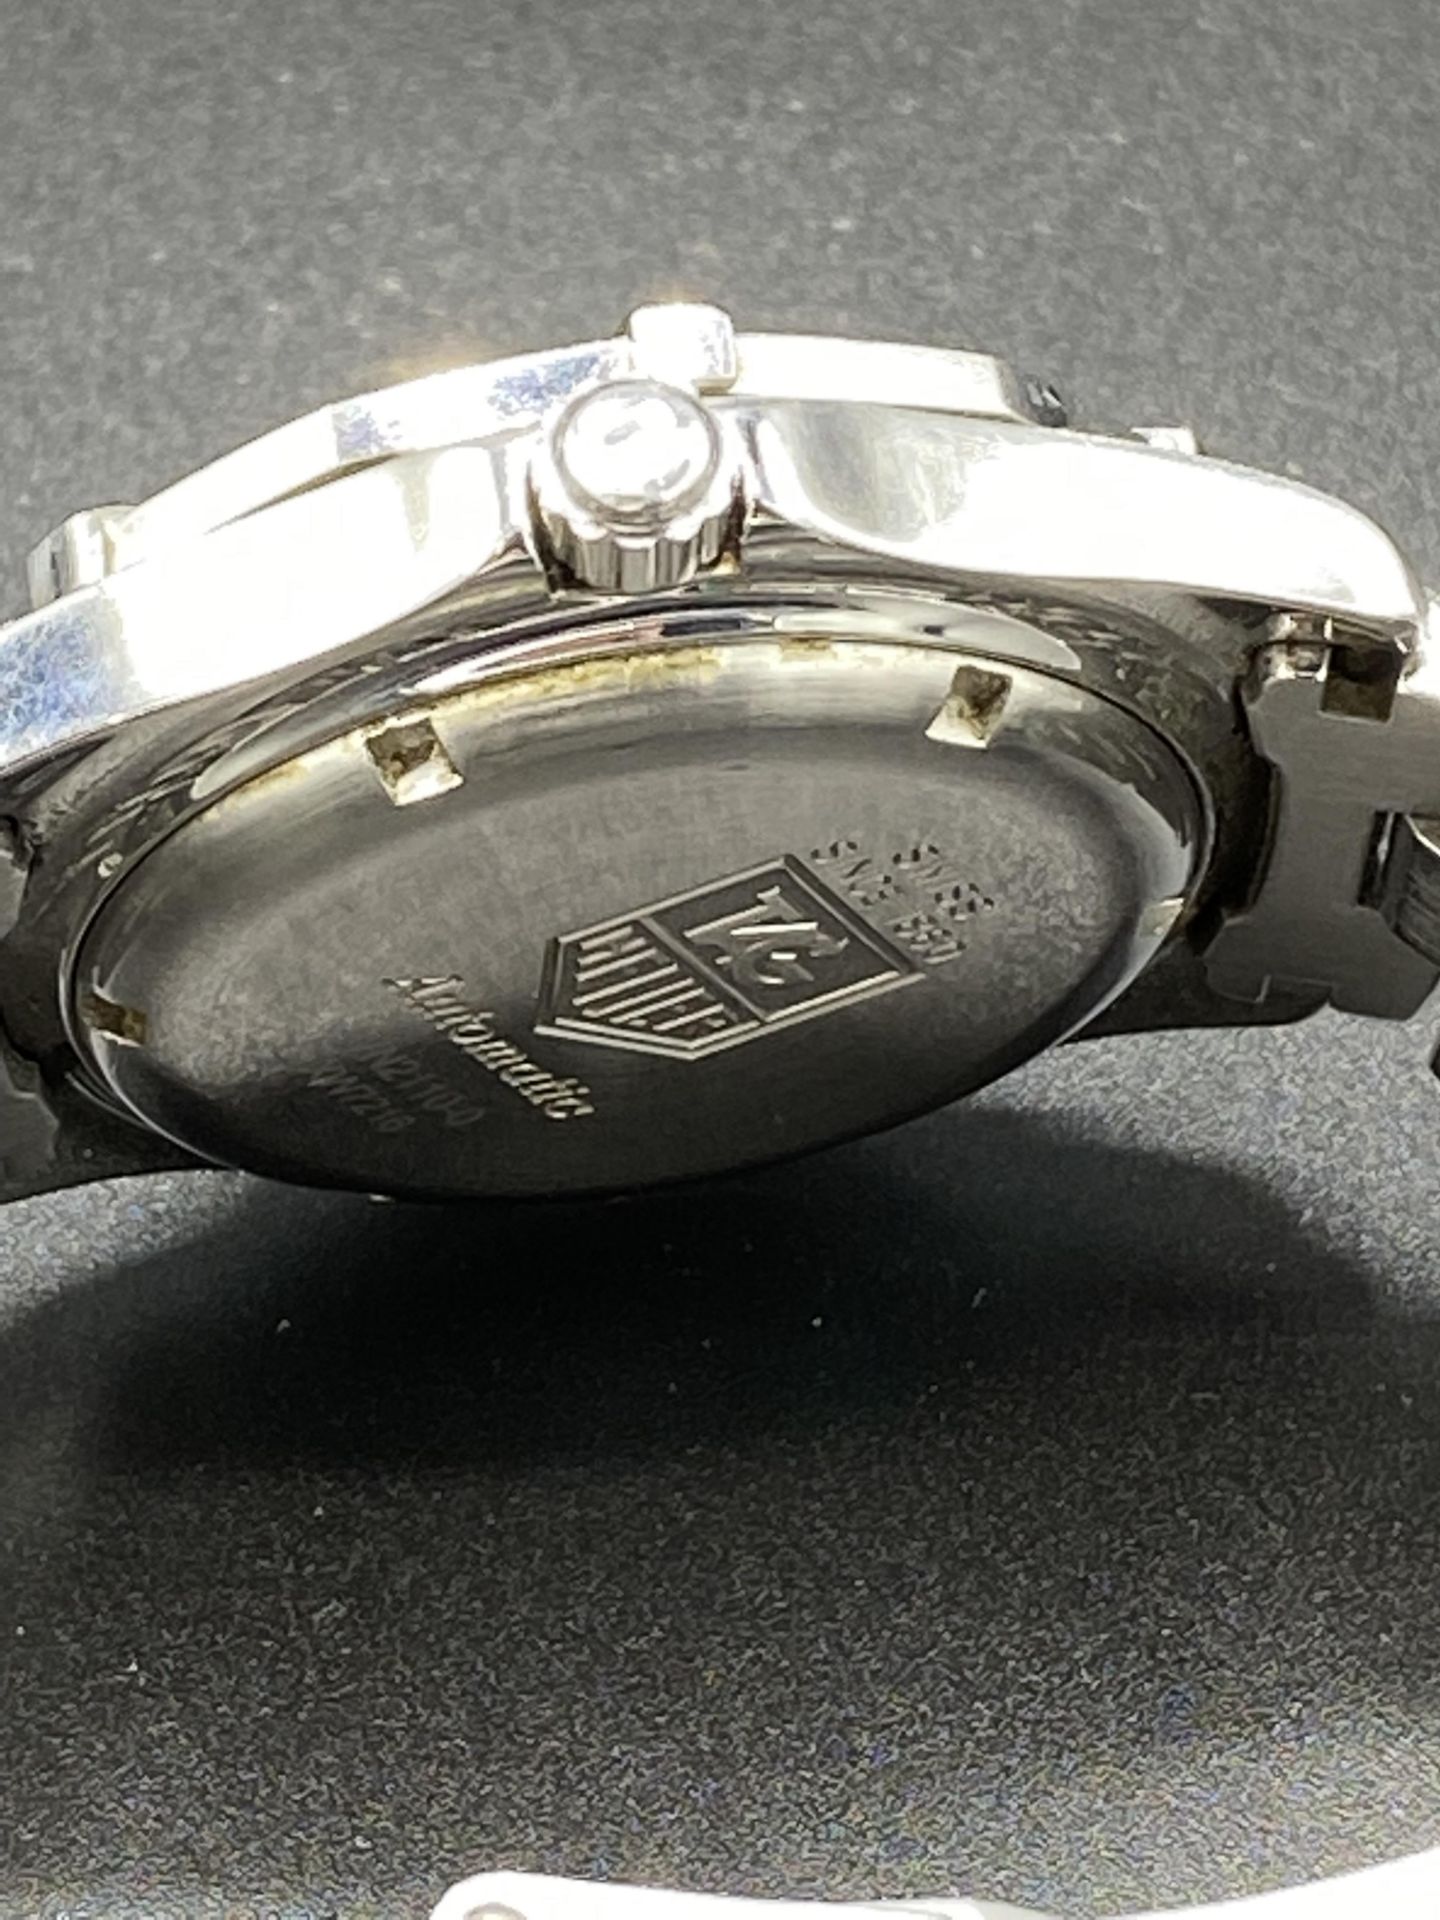 Tag Heuer stainless steel wrist watch - Image 4 of 7